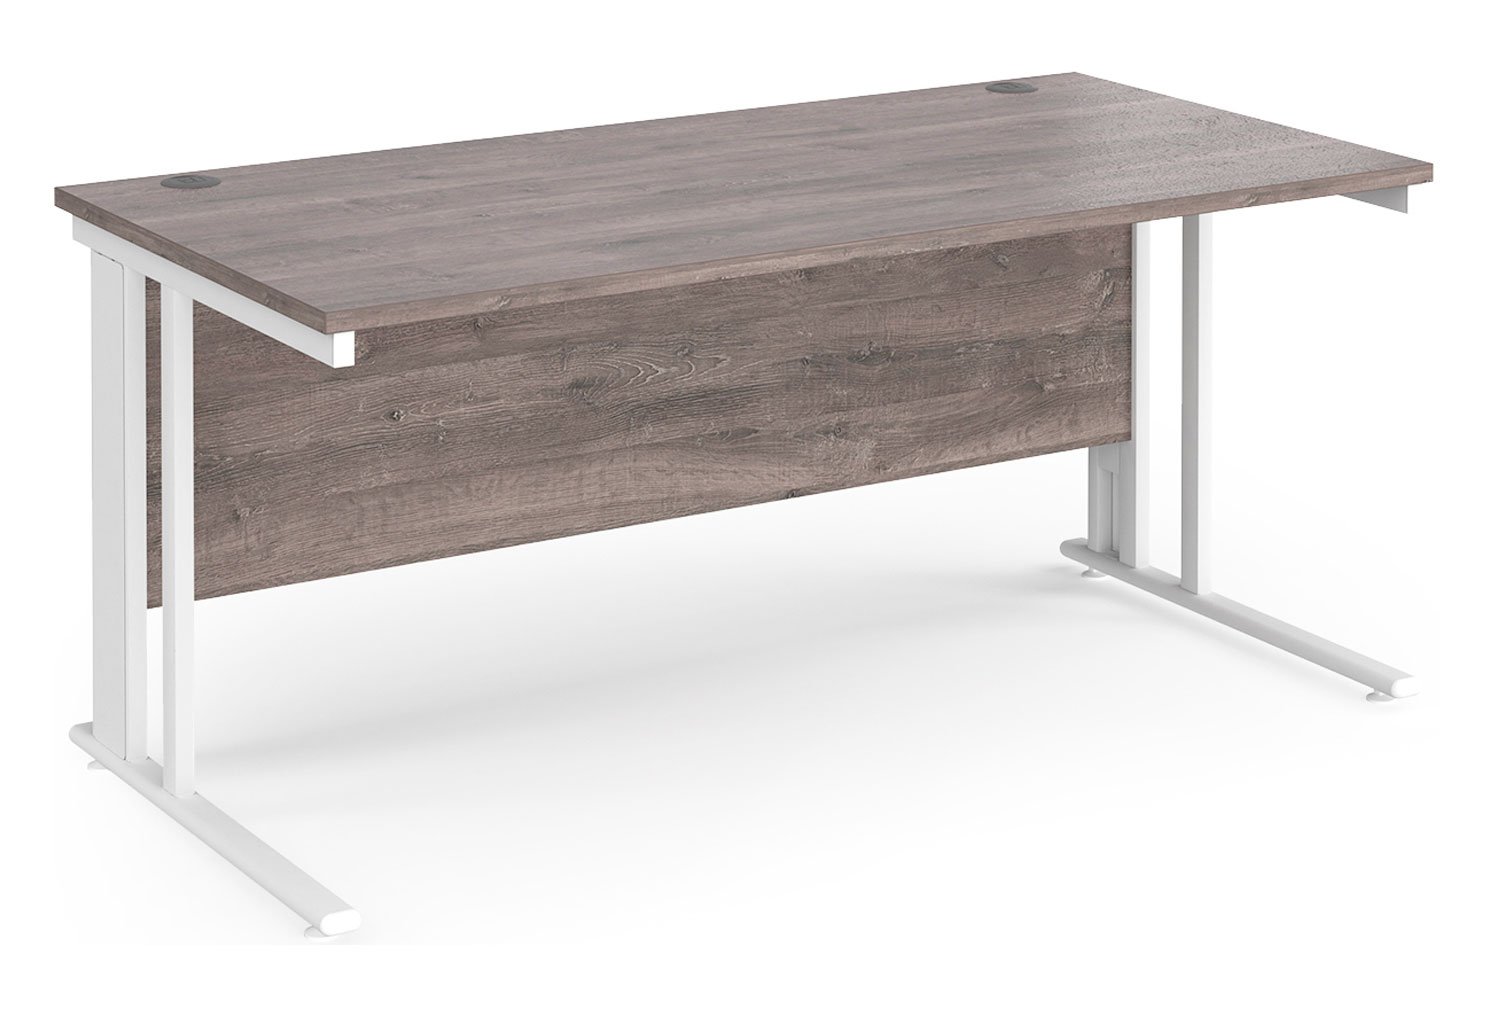 Value Line Deluxe Cable Managed Rectangular Office Desk (White Legs), 160wx80dx73h (cm), Grey Oak, Fully Installed